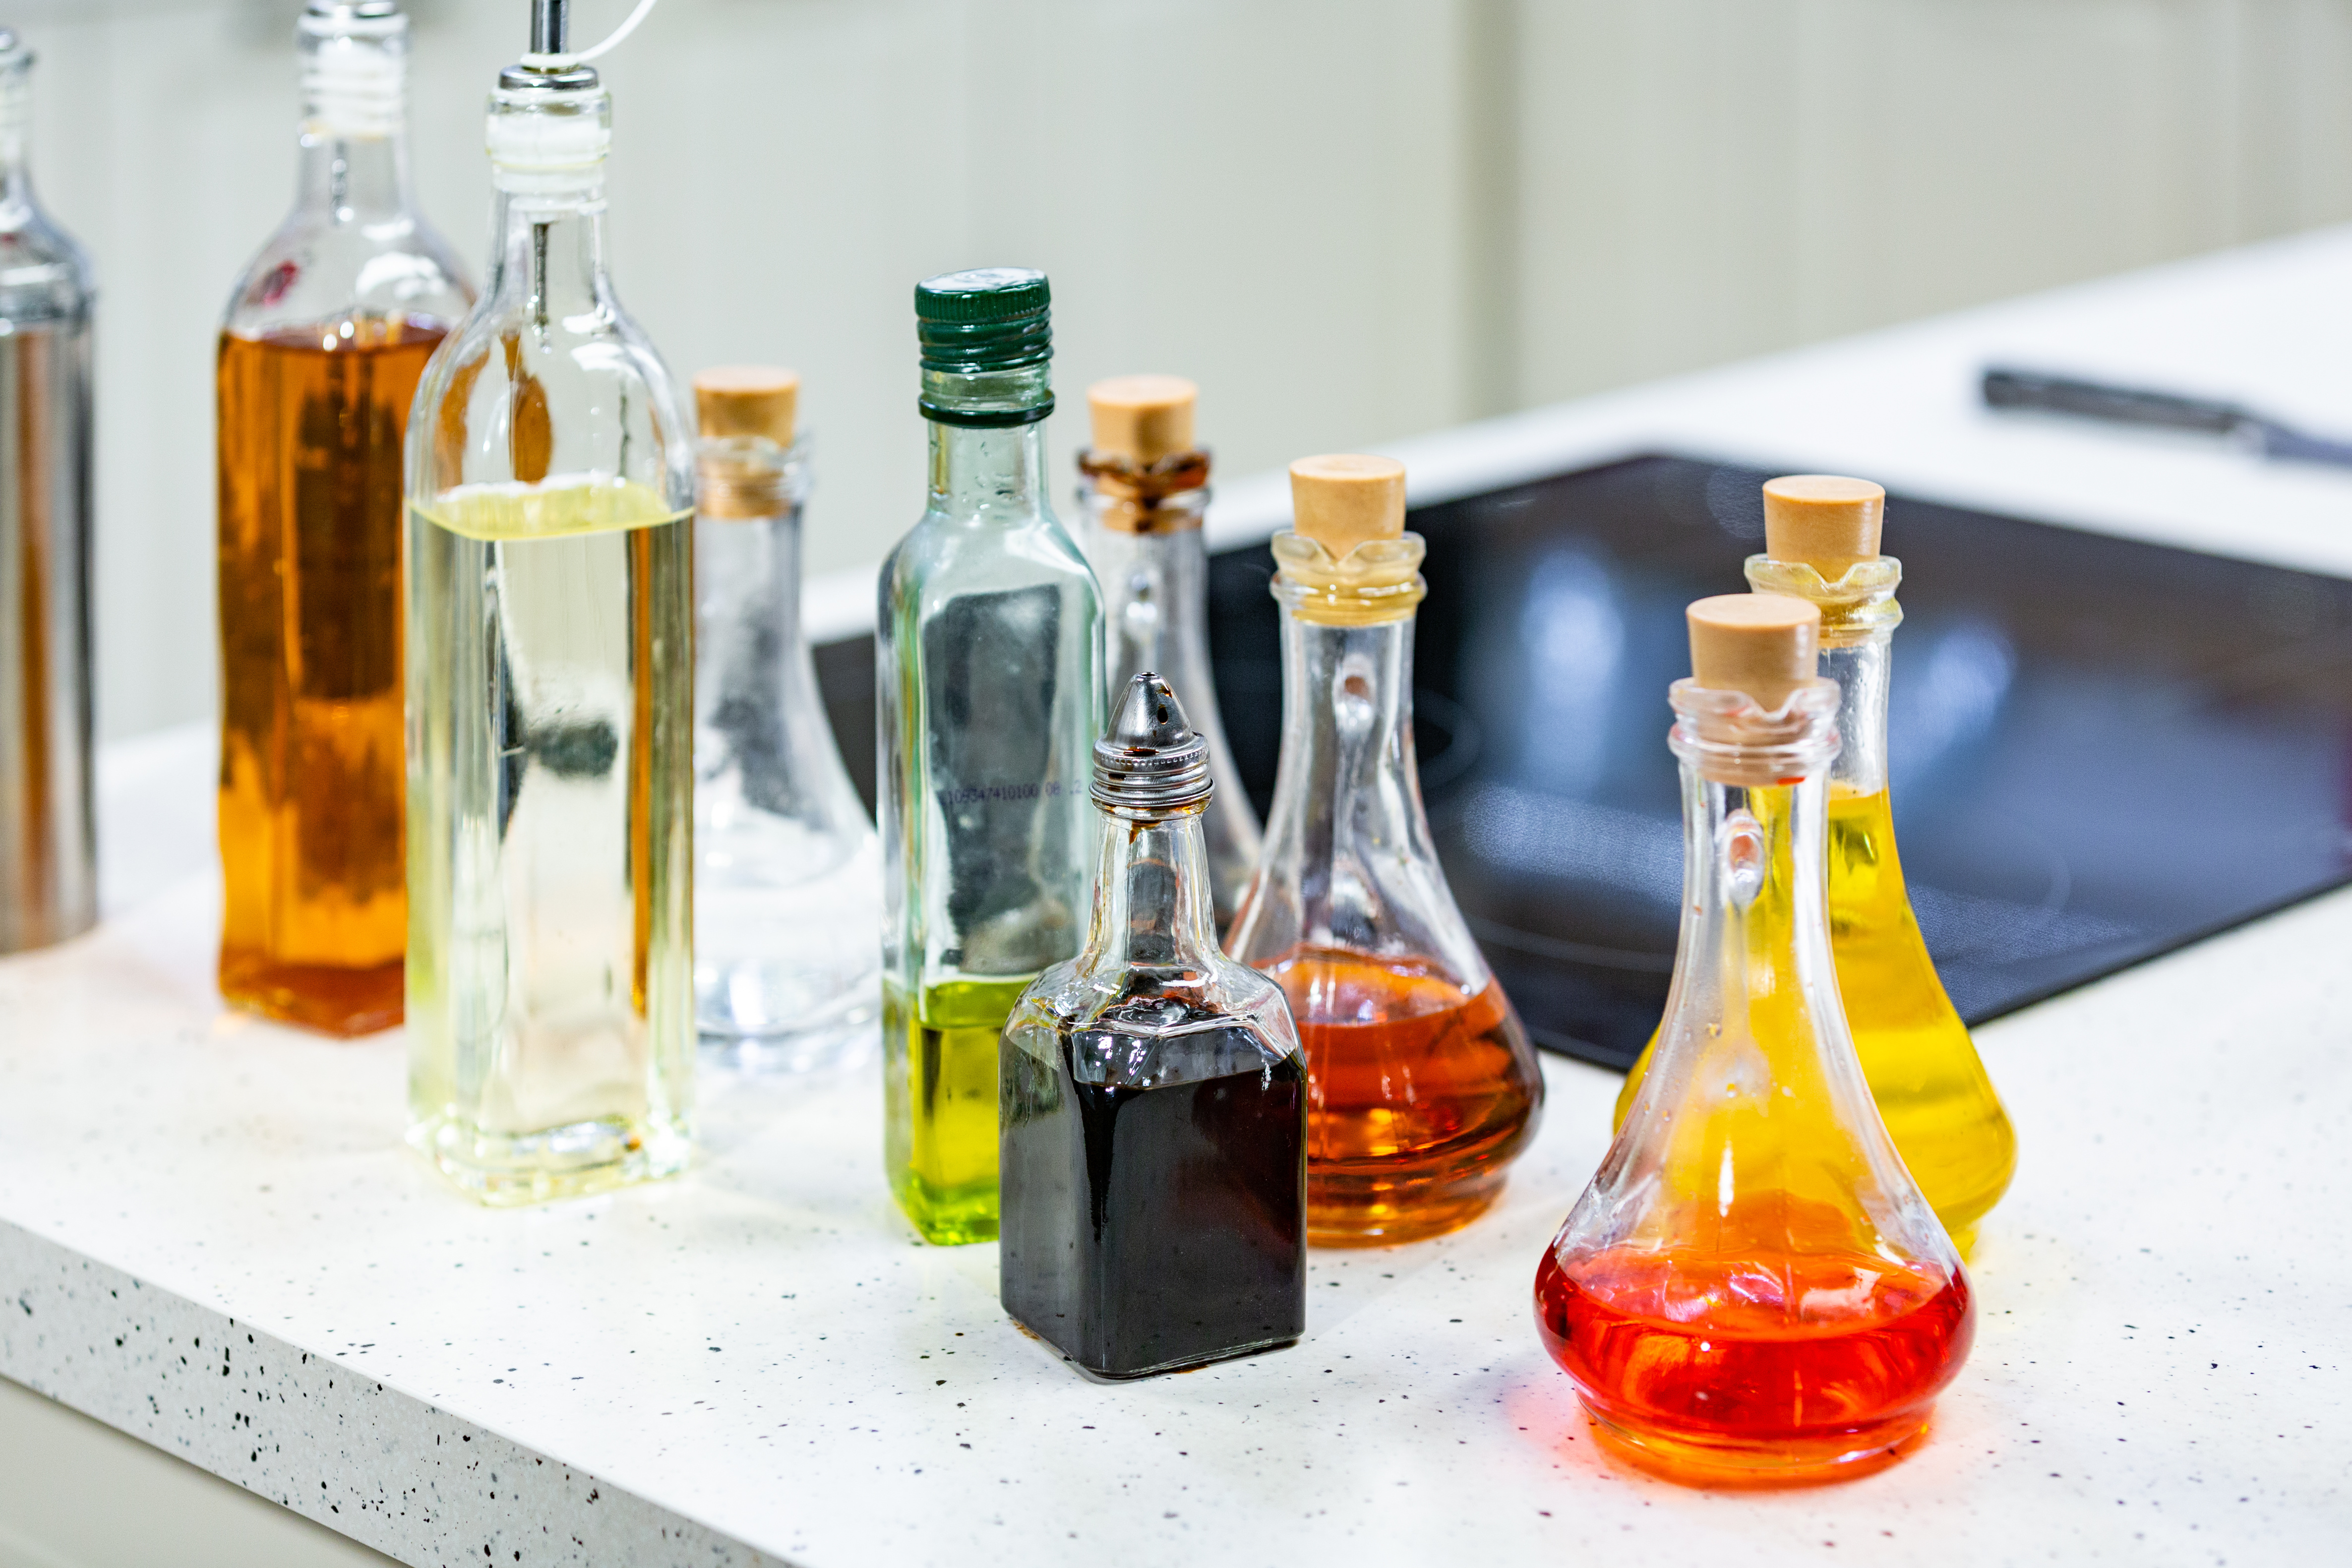 Small bottles of flavored olive oil and balsamic vinegar in the kitchen.